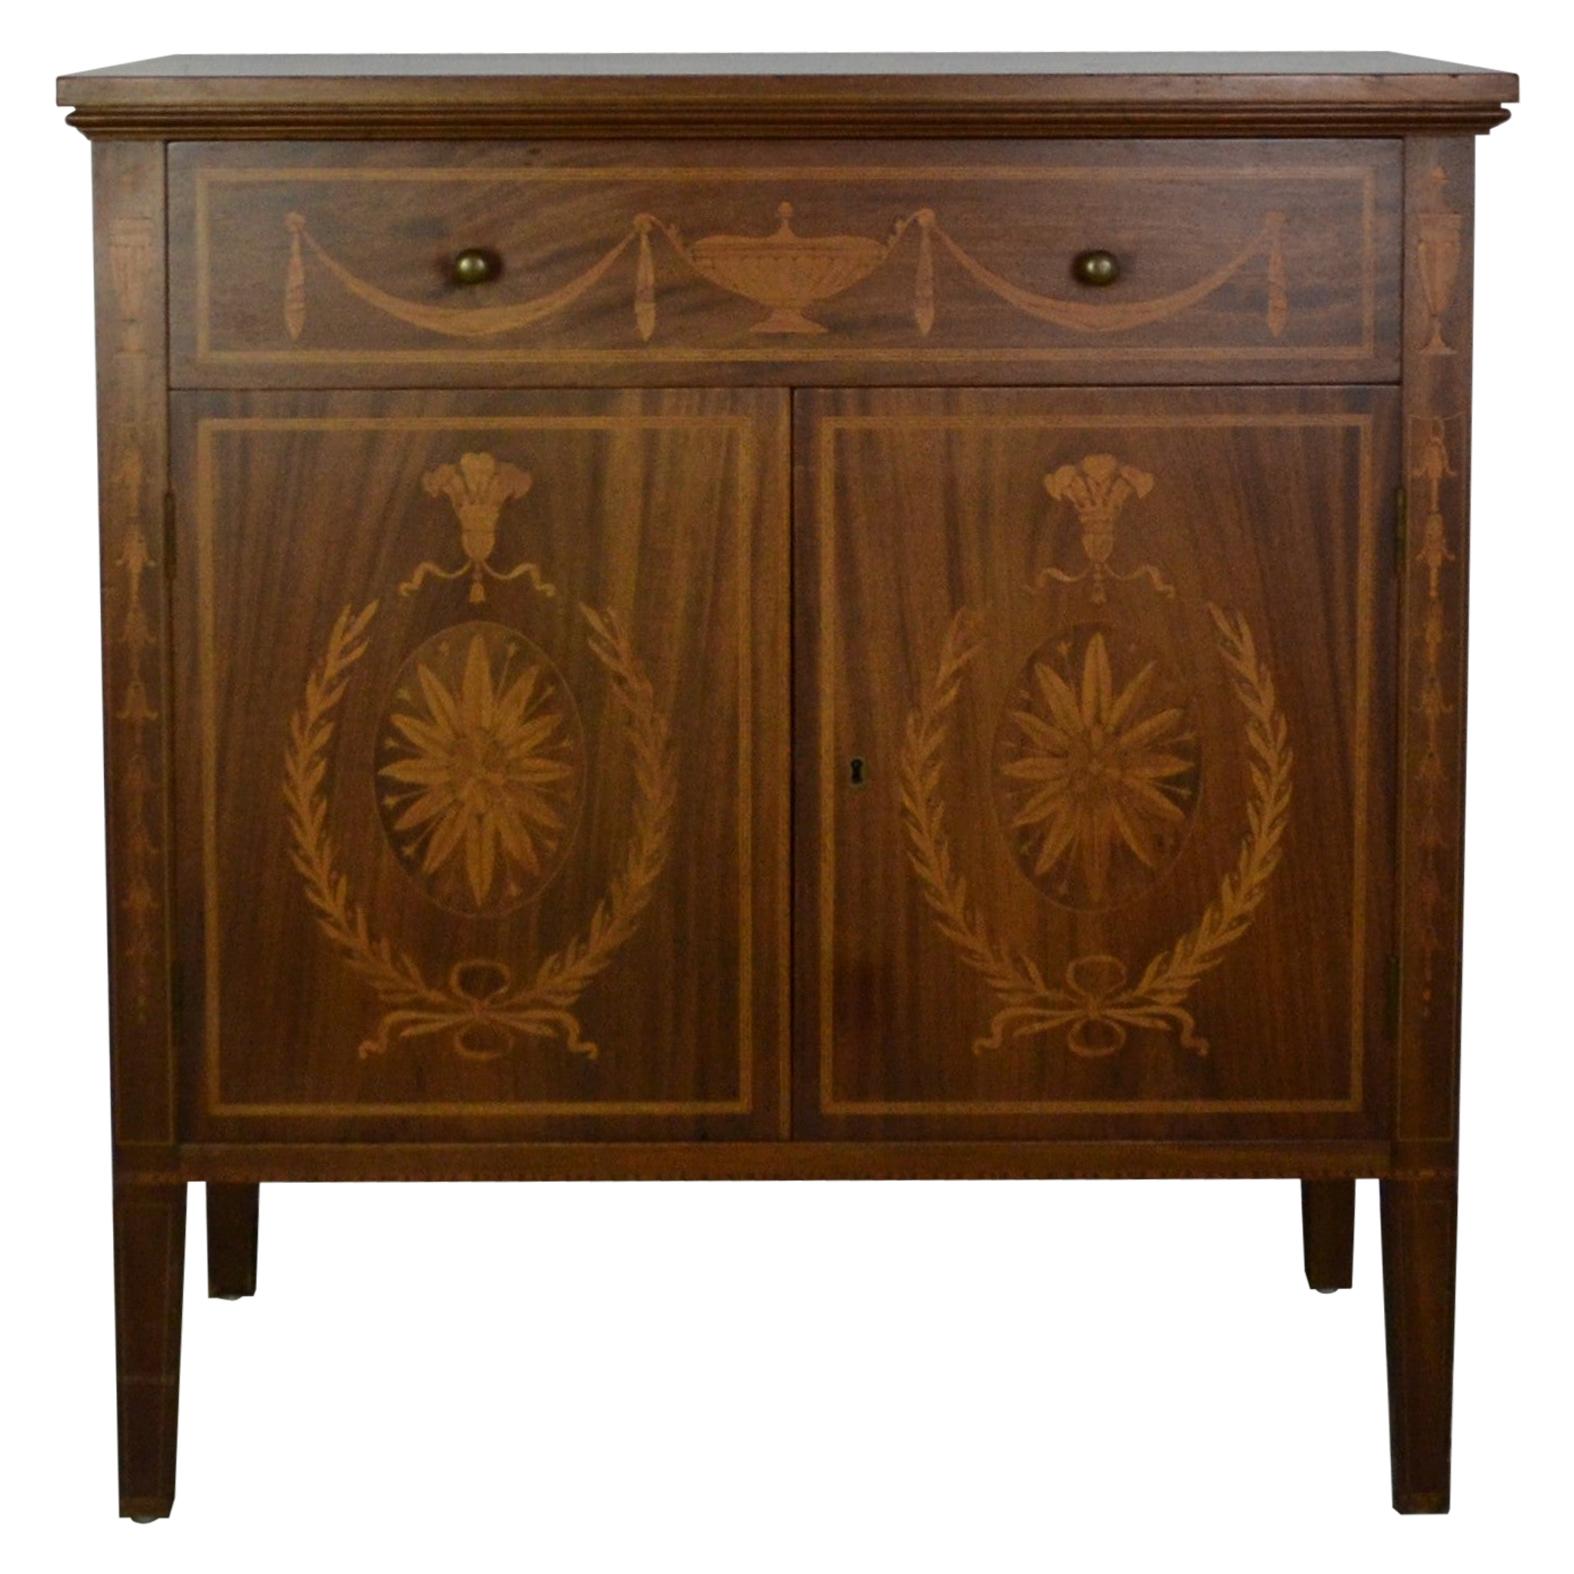 Edwardian Style Cabinet by Potthast Brothers